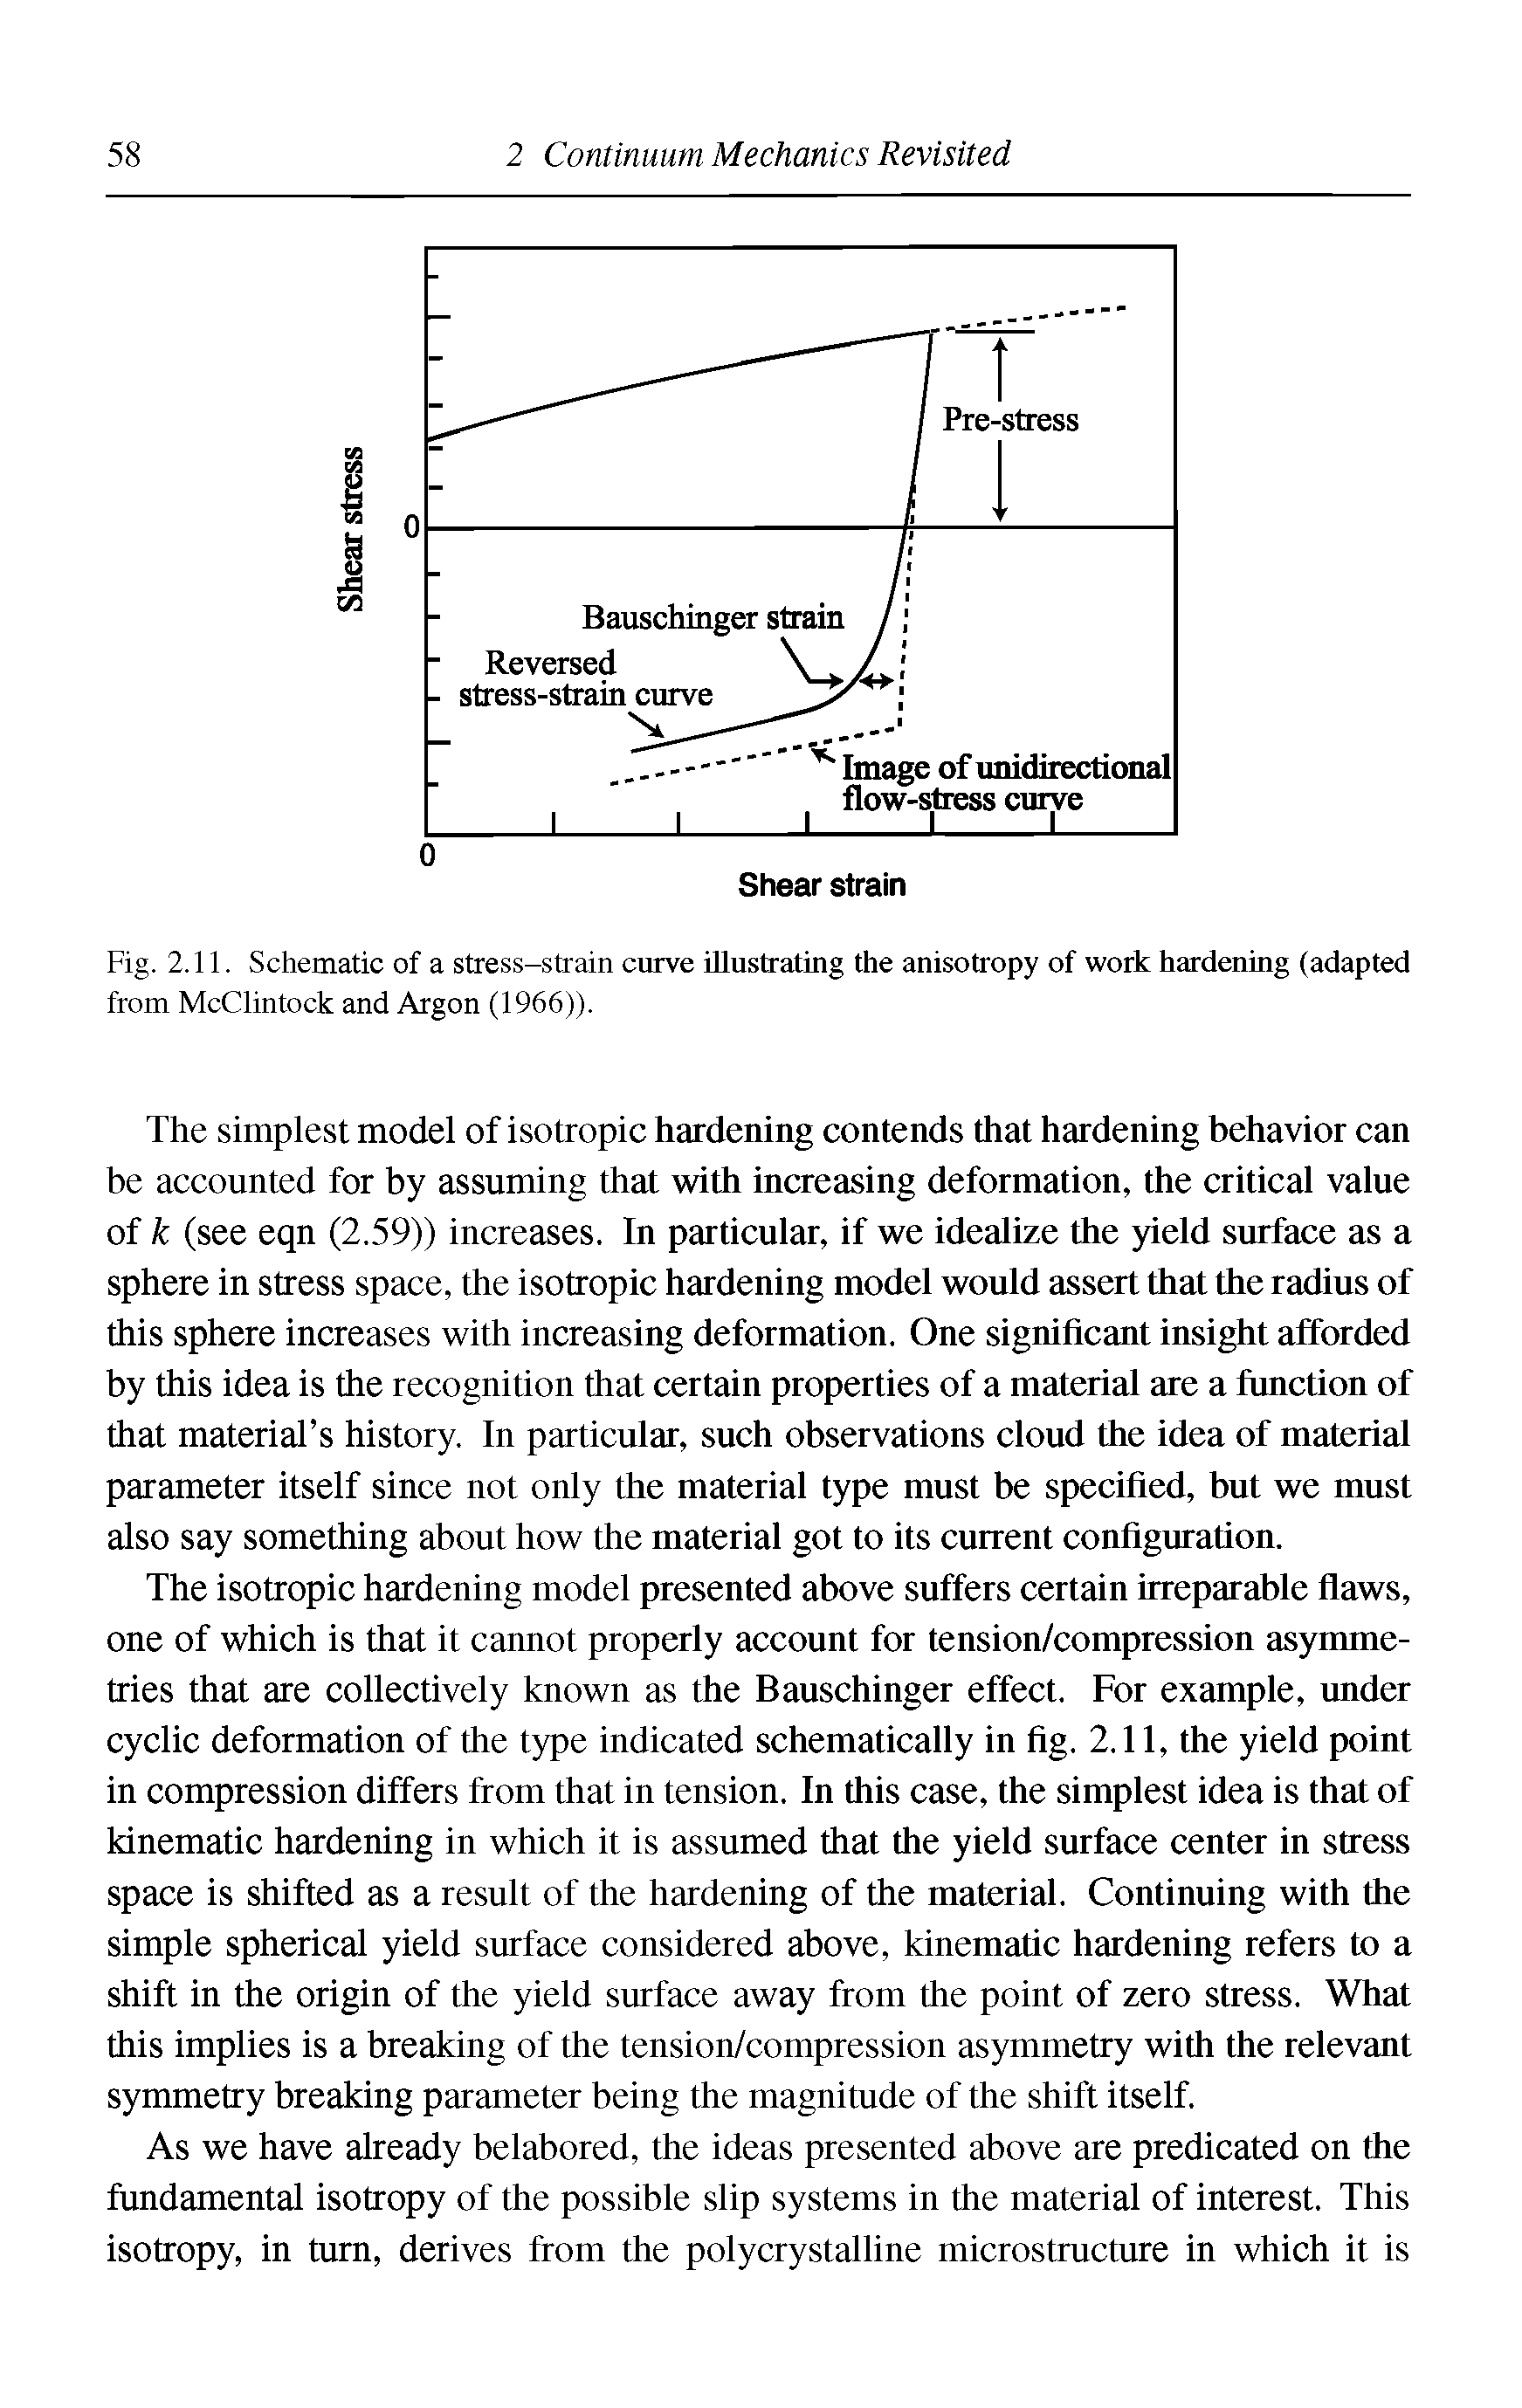 Fig. 2.11. Schematic of a stress-strain curve illustrating the anisotropy of work hardening (adapted...